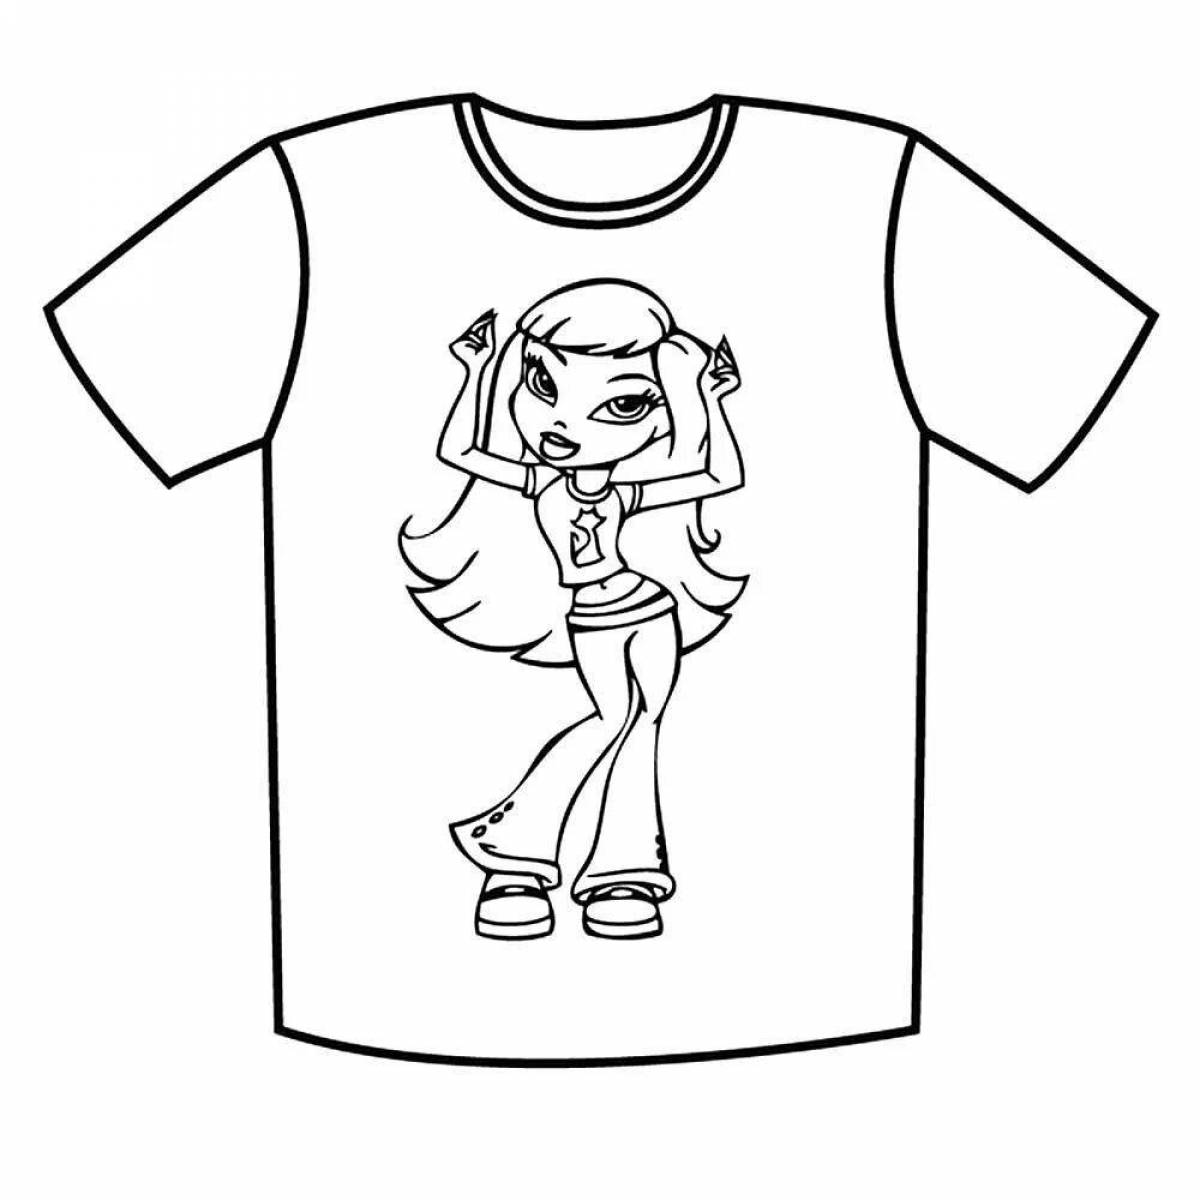 Coloring book in Nice Boy T-shirt